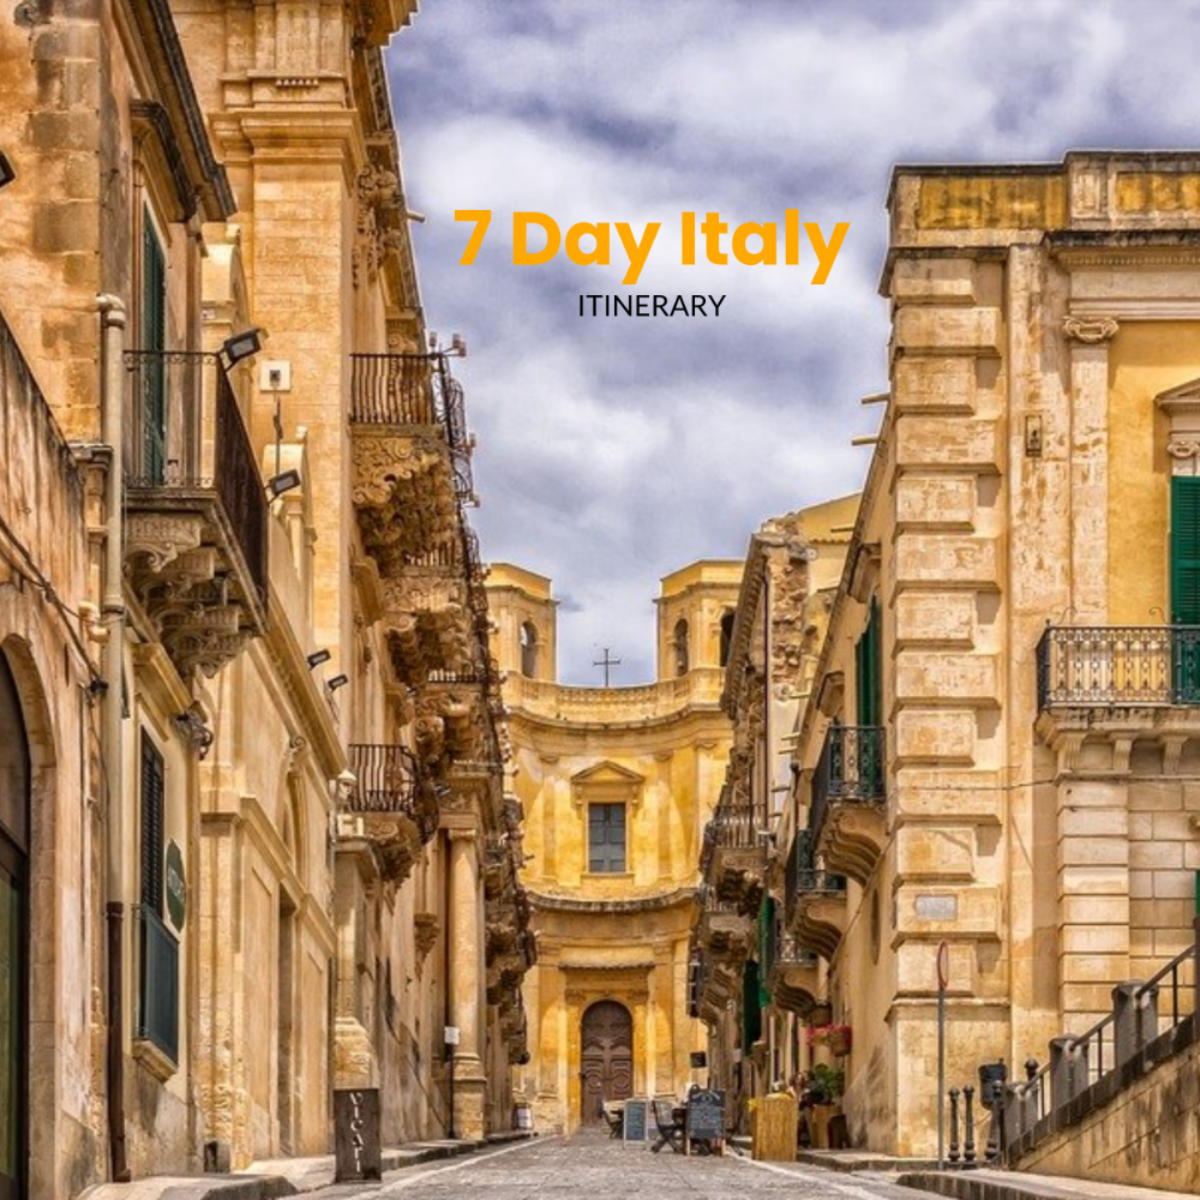 7 day Italy Itinerary Template